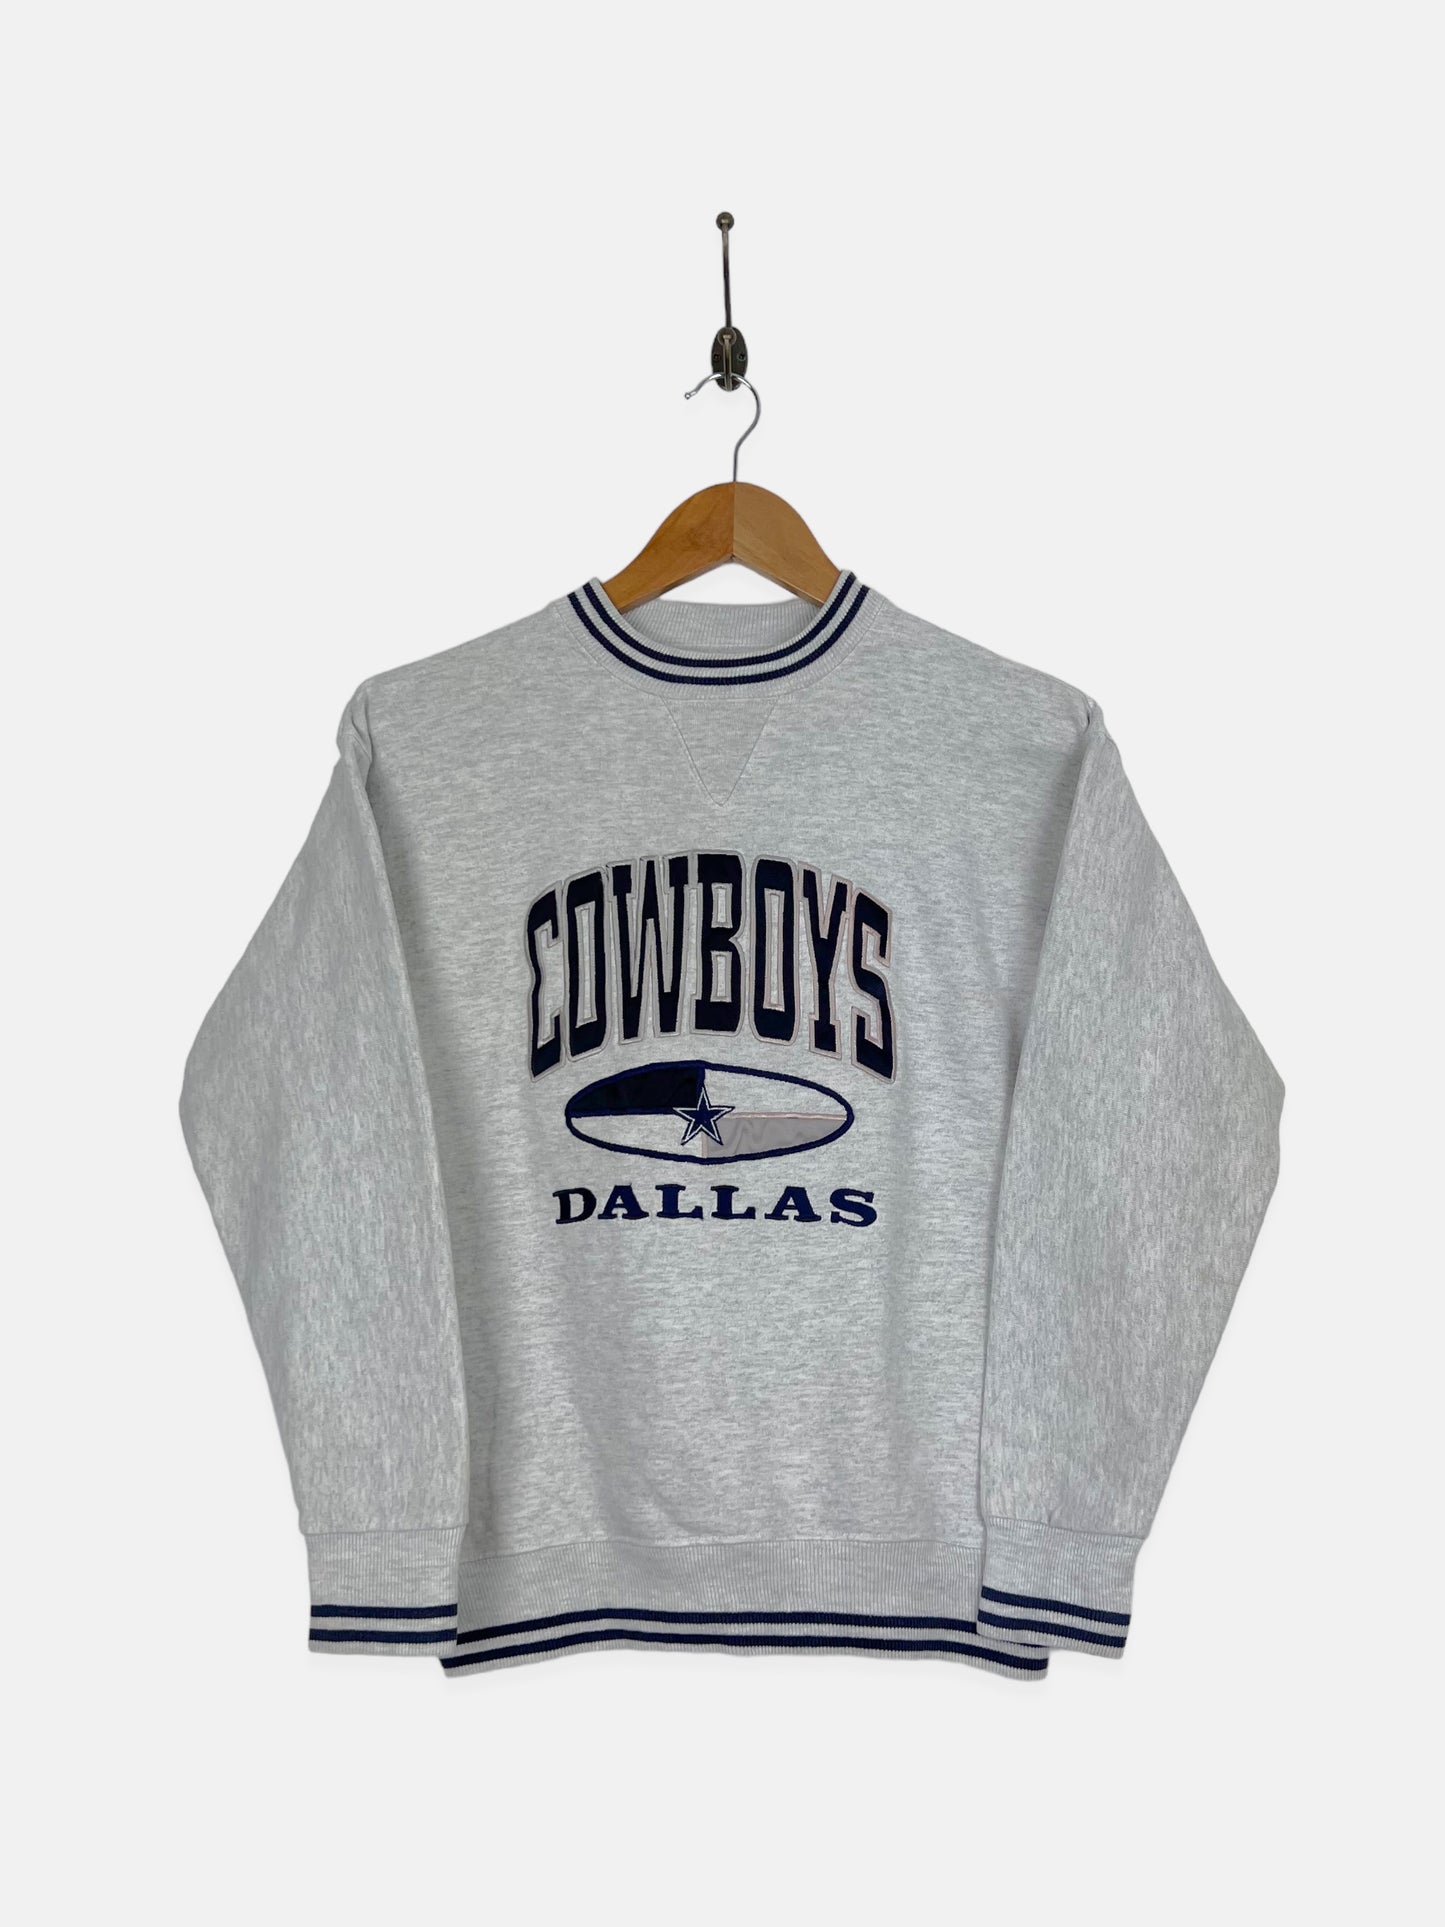 90's Youth Dallas Cowboys NFL USA Made Embroidered Vintage Sweatshirt